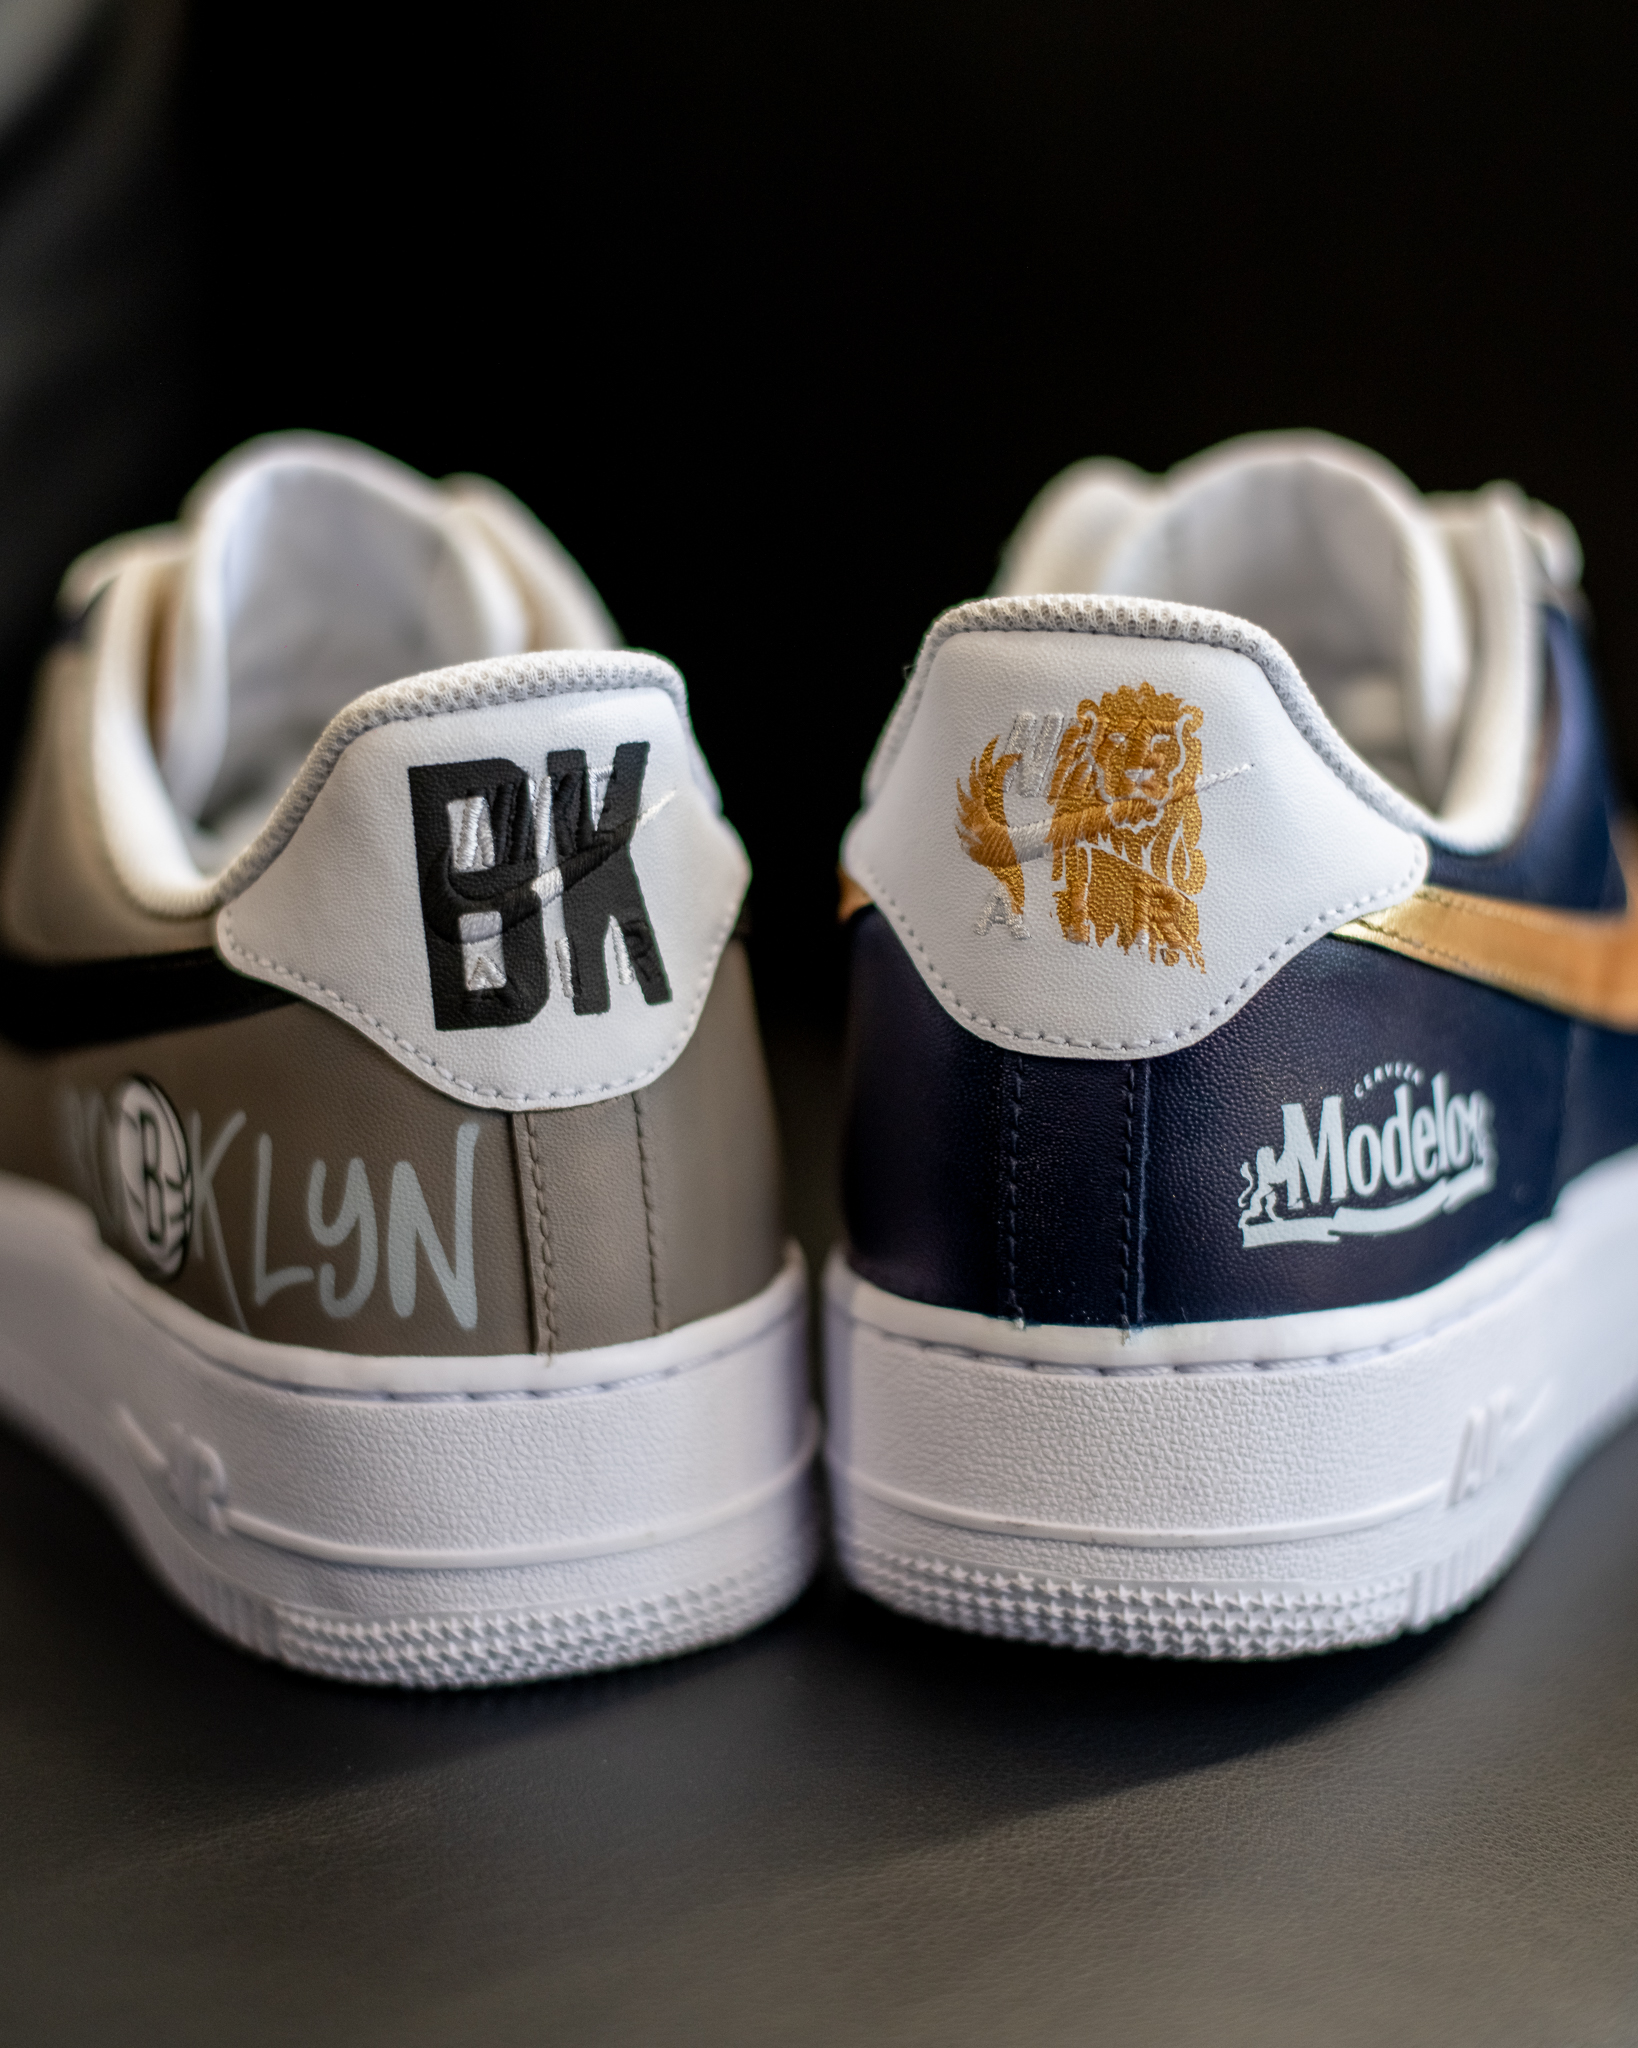 Modelo x Brooklyn Nets Team Up for Shoe Collab